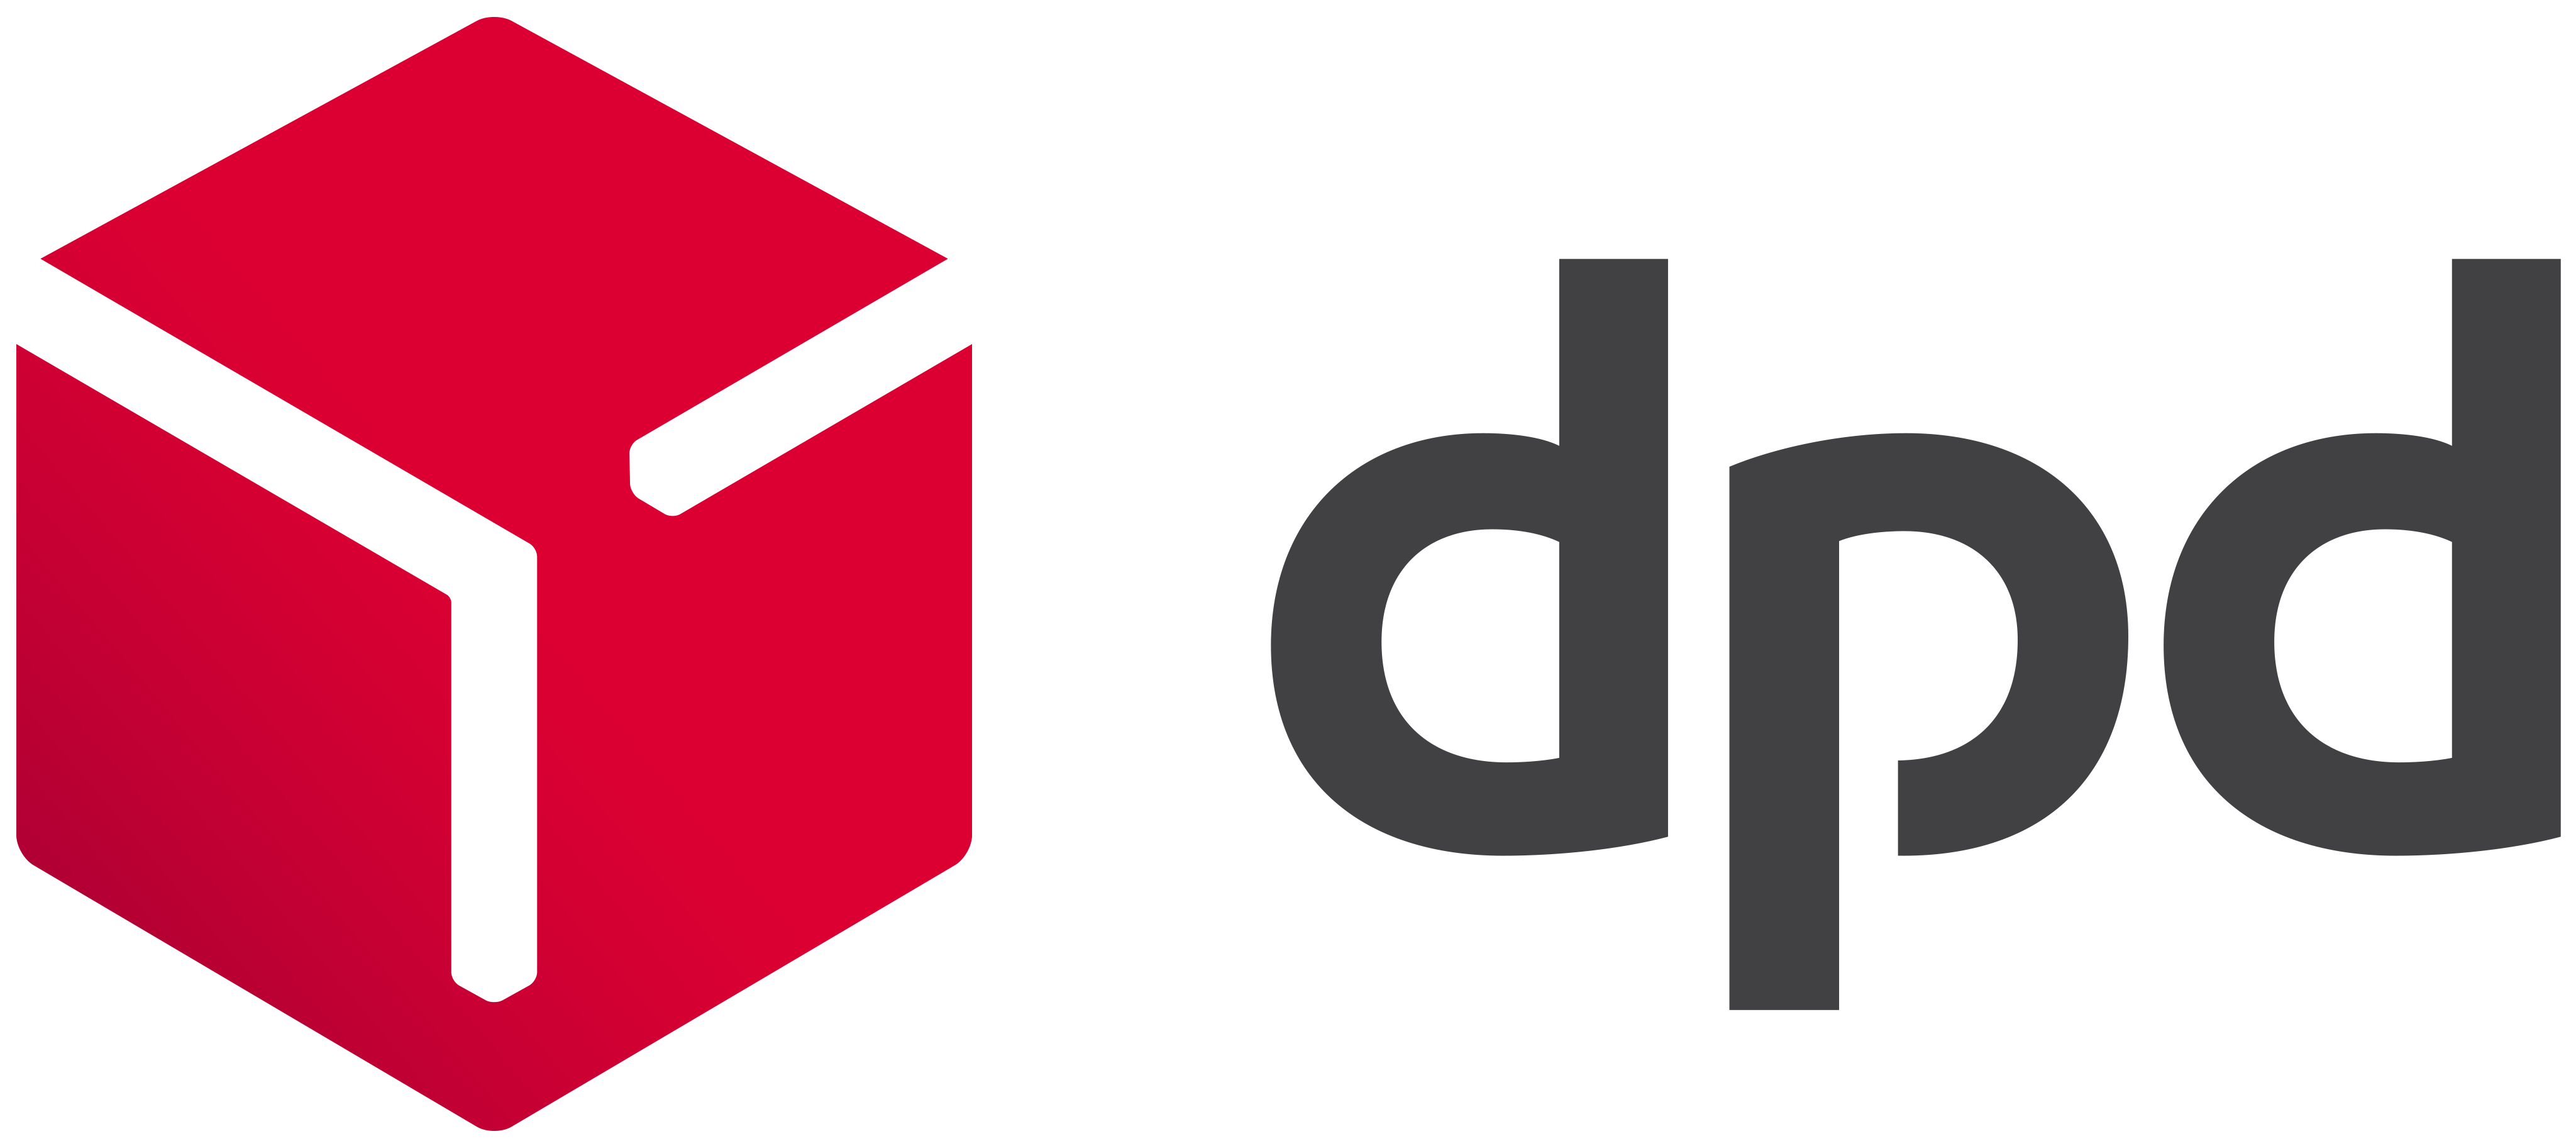 File:DPD logo(red)2015.png - Wikimedia Commons